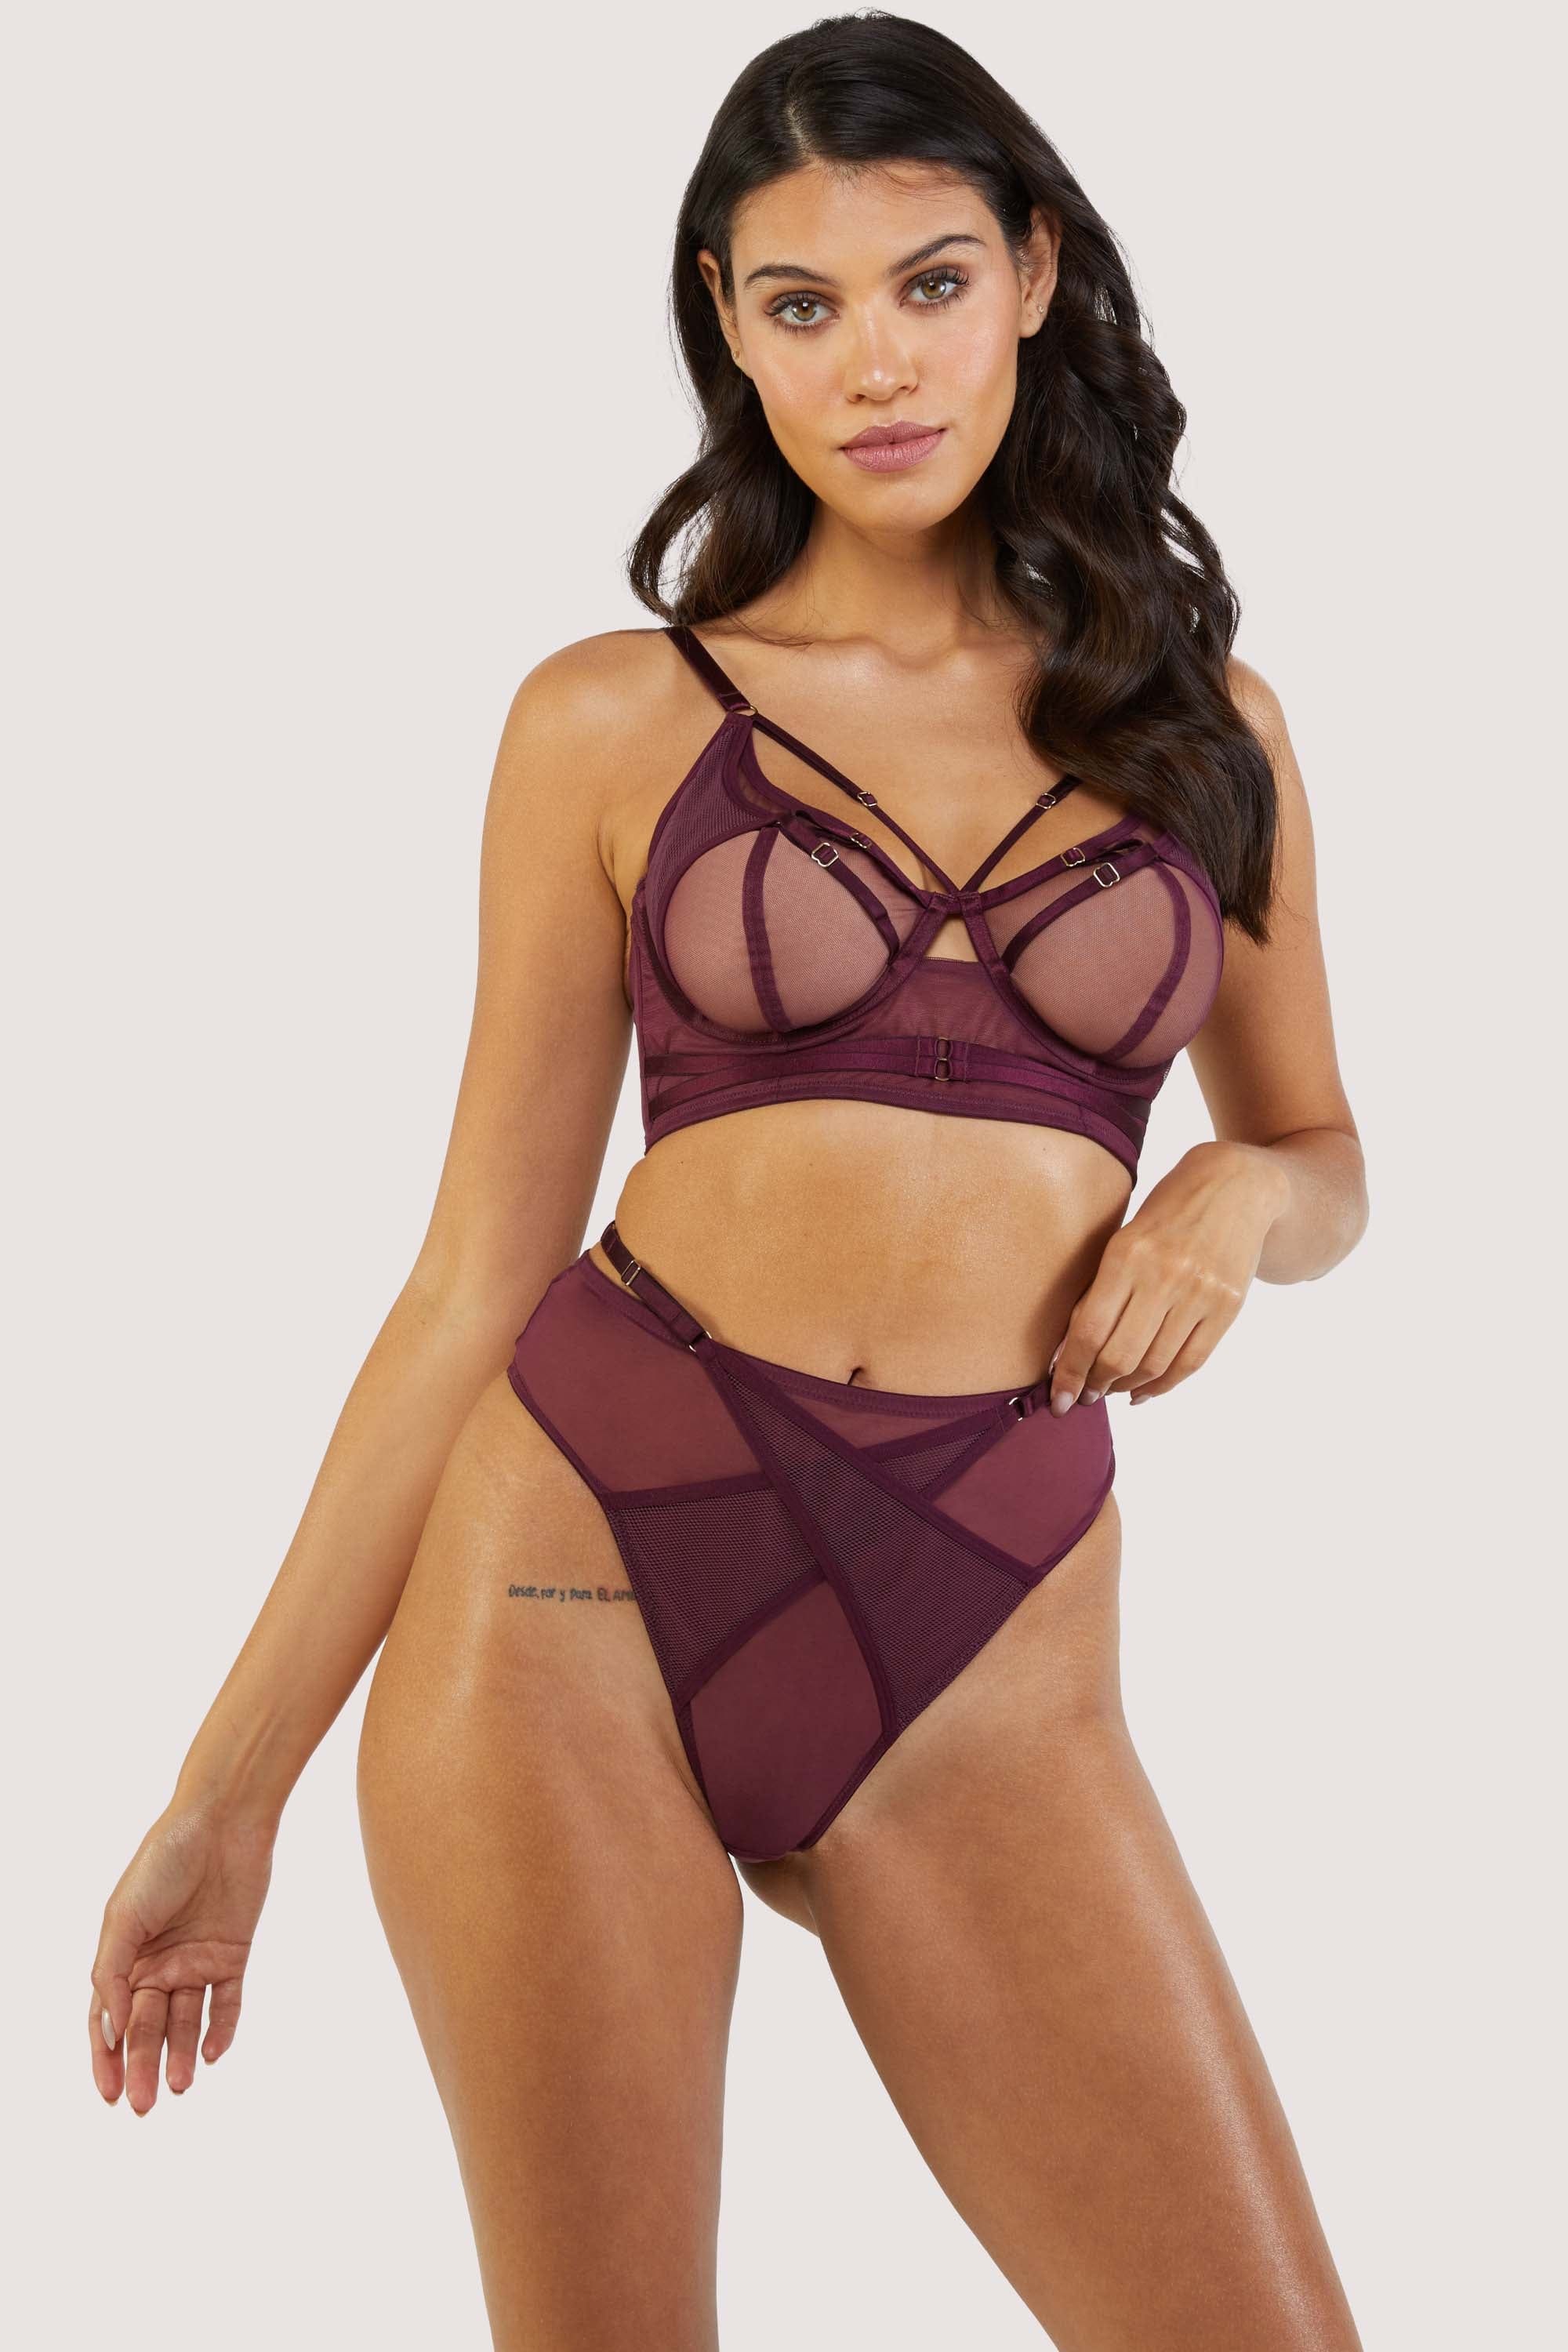 Dark purple-red mesh bra with strap detailing over the bust and visible gold hardware. Paired with matching thong.